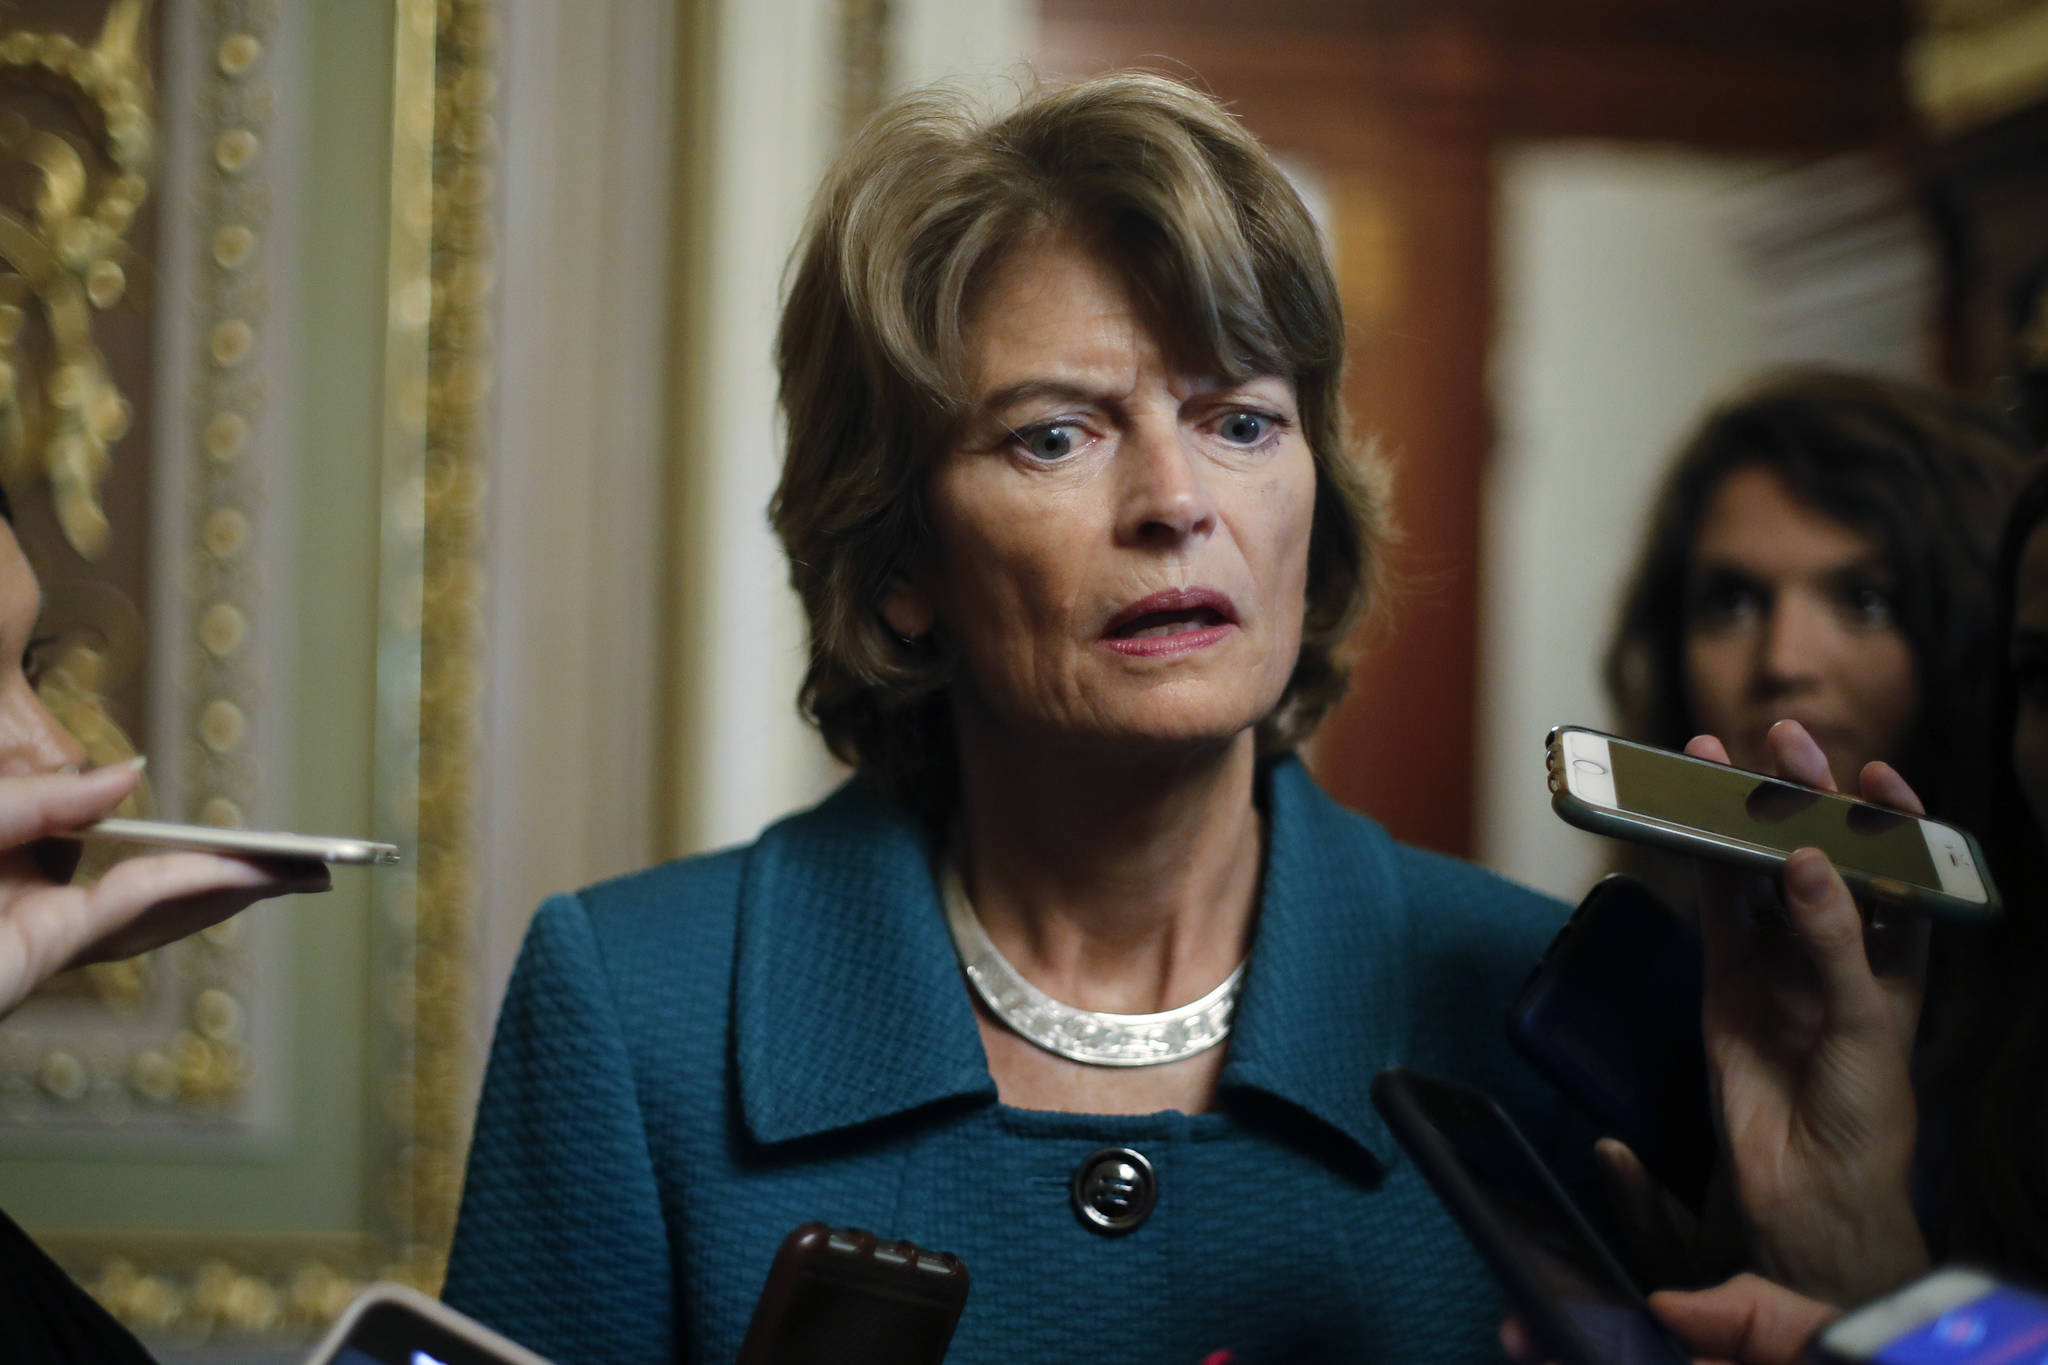 In this Oct. 4, 2018 file photo, Sen. Lisa Murkowski, R-Alaska, speaks to members of the media on Capitol Hill in Washington. The fight over President Donald Trump’s border wall is heading to the GOP-controlled U.S. Senate, putting Republicans in the uncomfortable spot of deciding whether to back his declaration of a national emergency. (AP Photo/Pablo Martinez Monsivais)